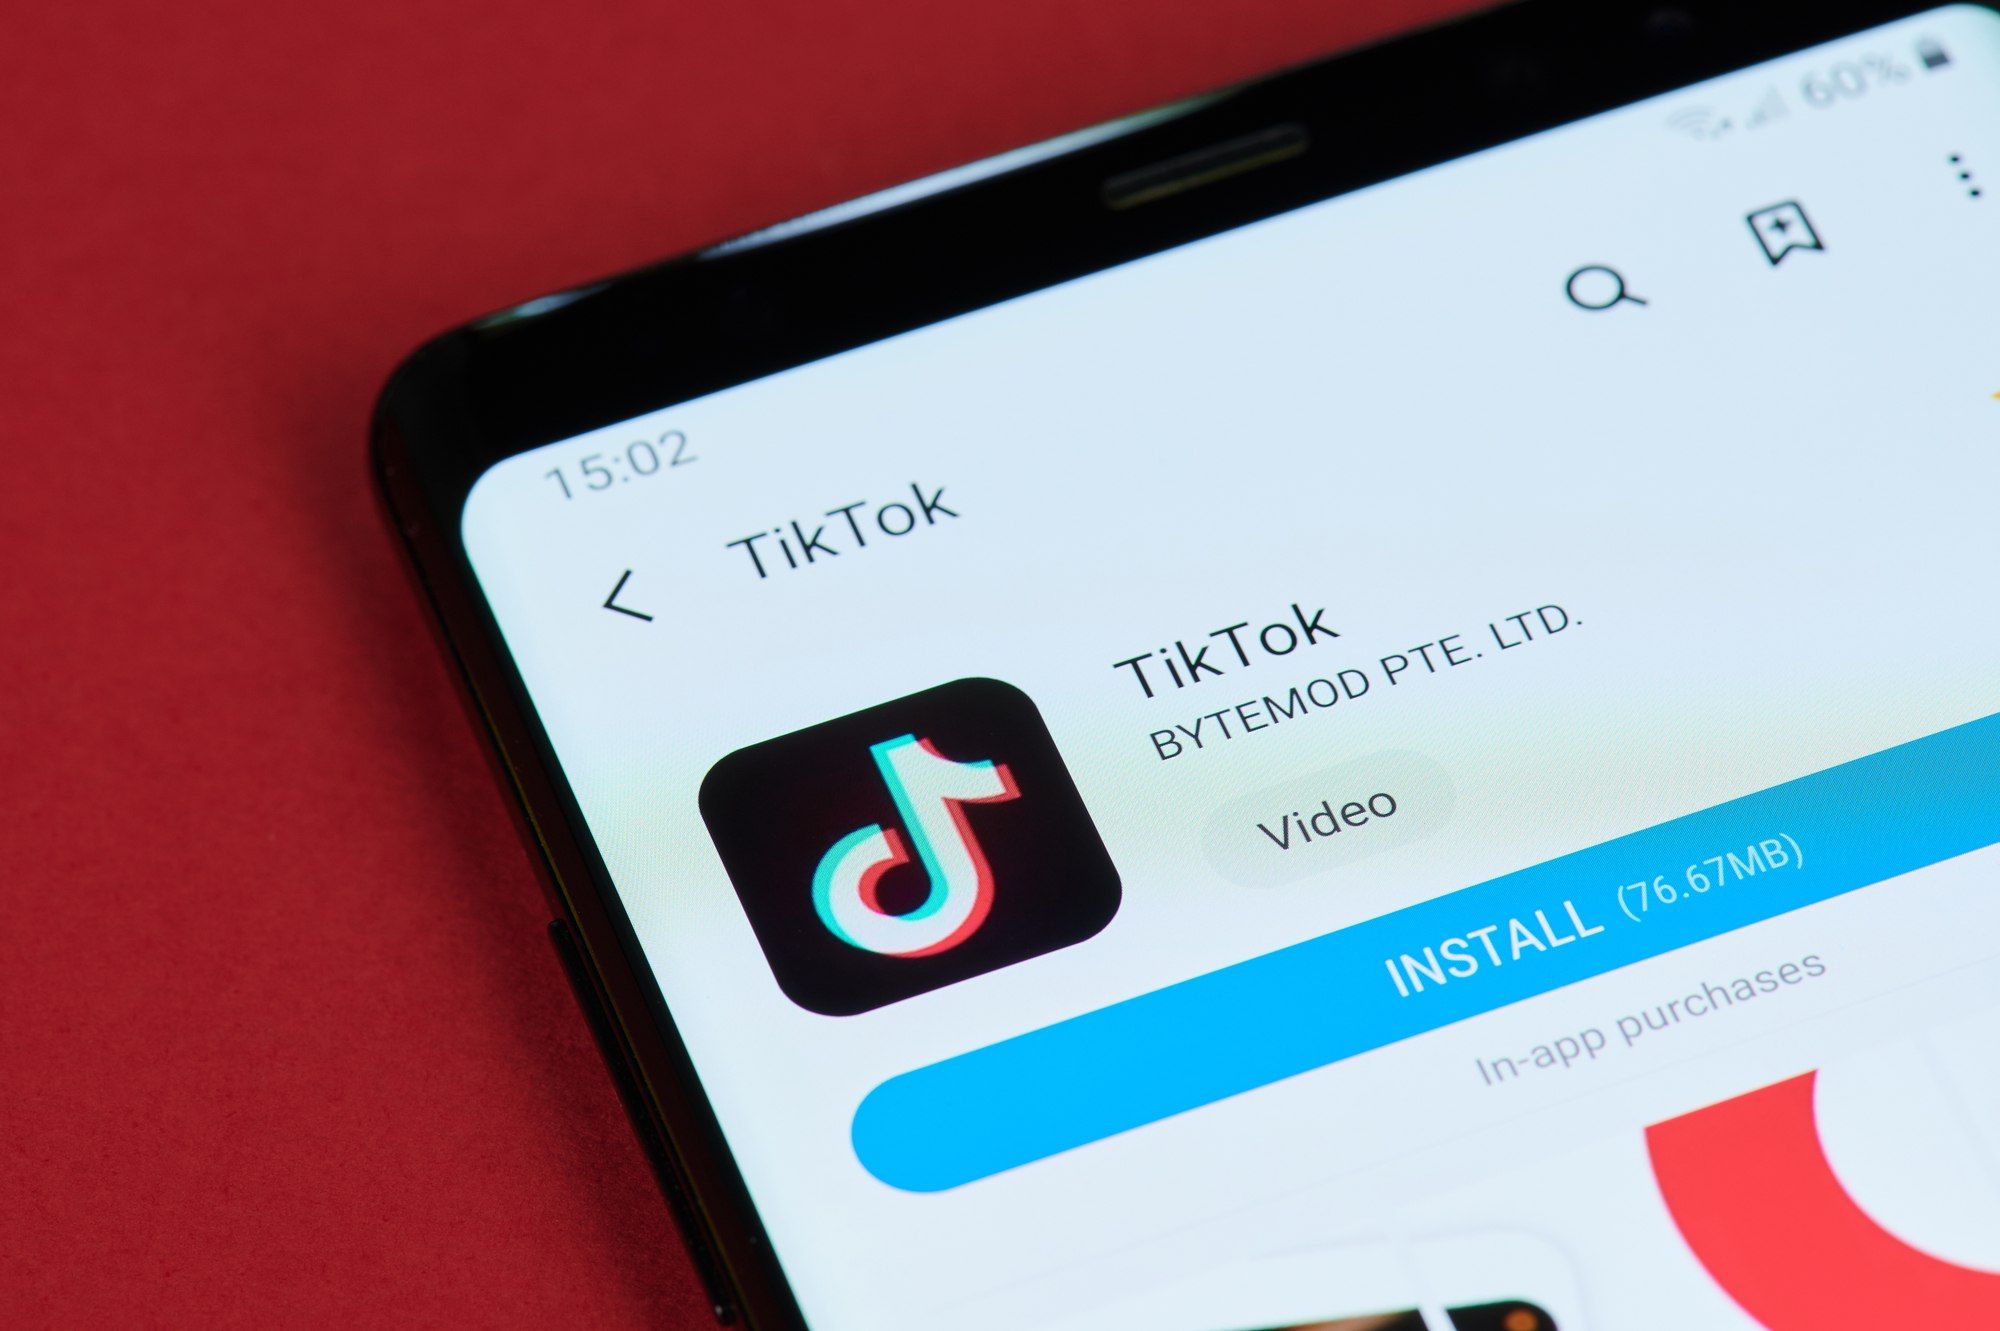 TikTok settlement has been reached for users' privacy.